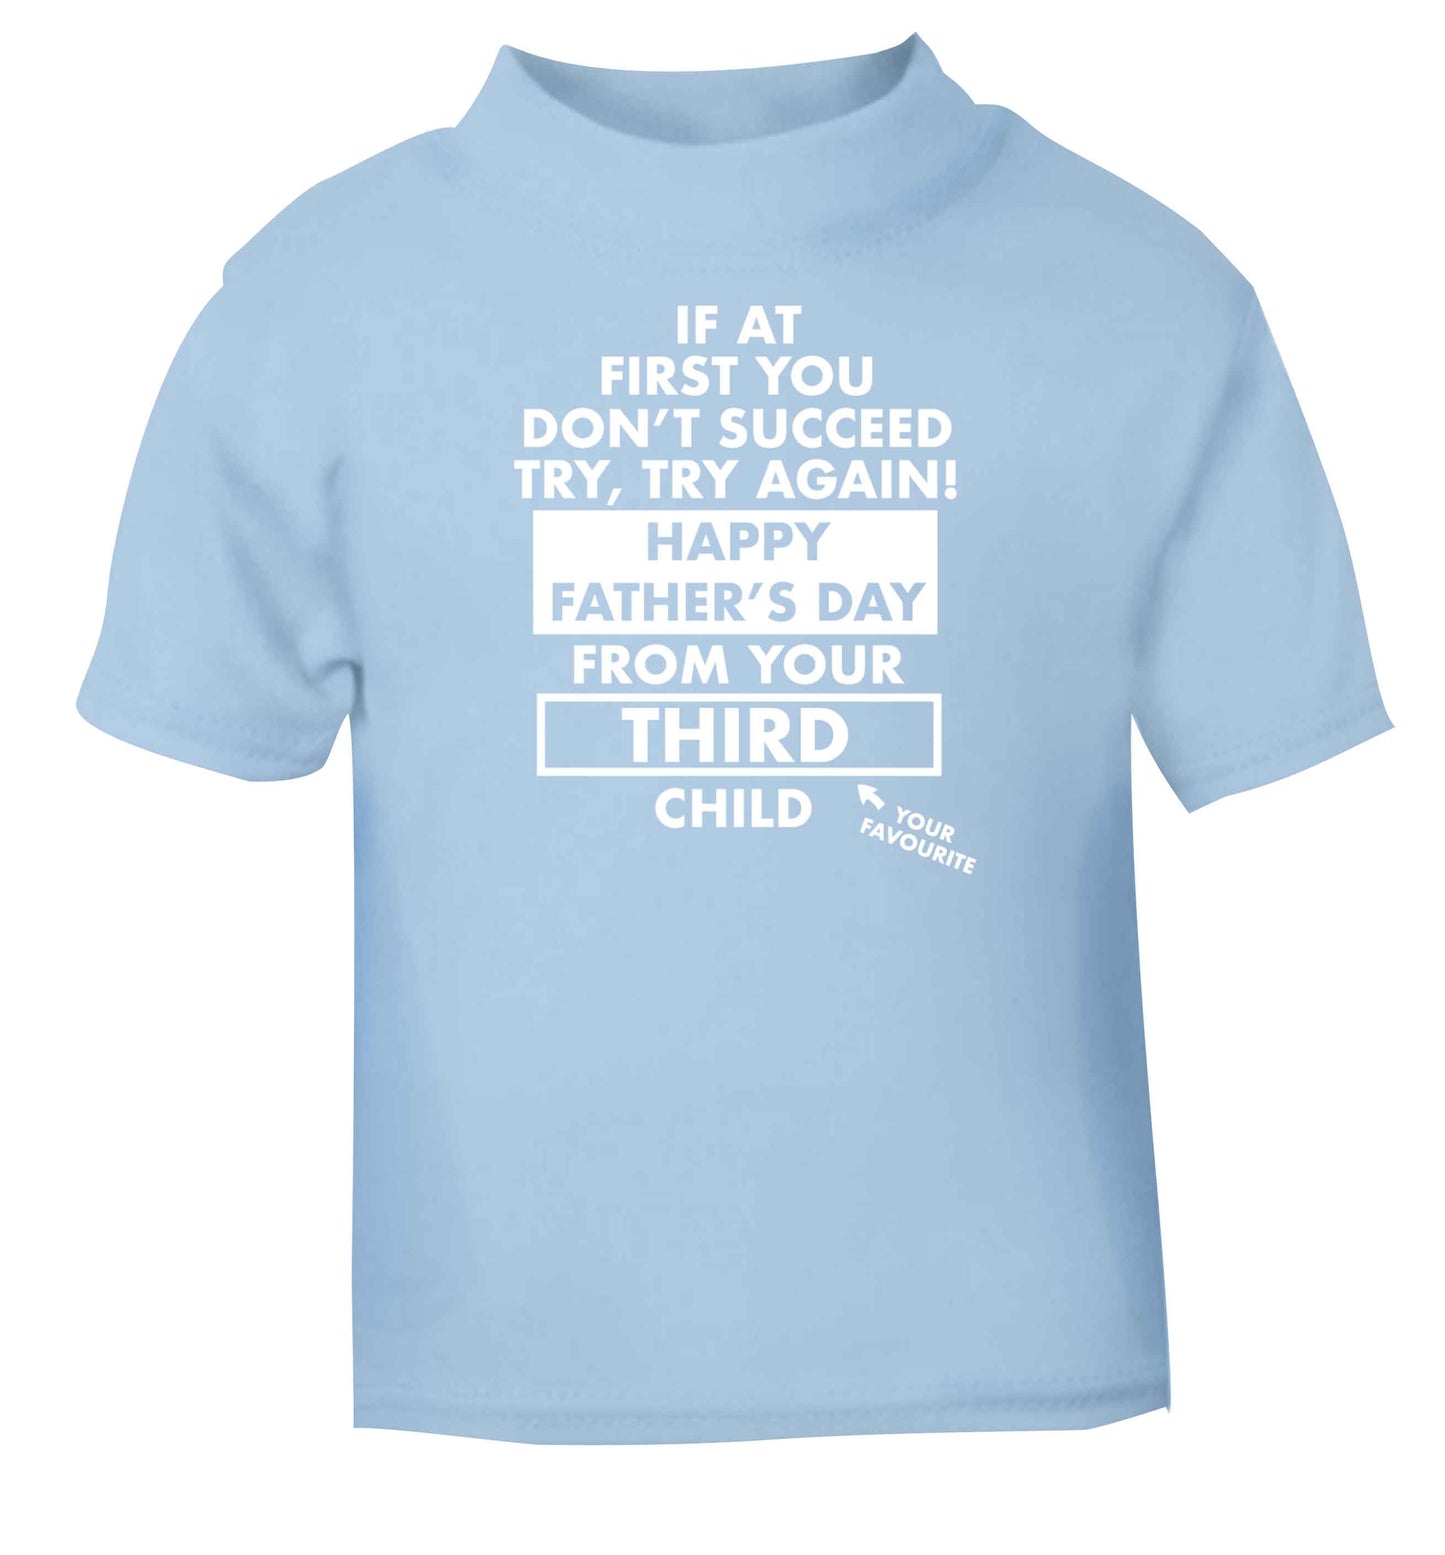 If at first you don't succeed try, try again Happy Father's day from your third child! light blue baby toddler Tshirt 2 Years